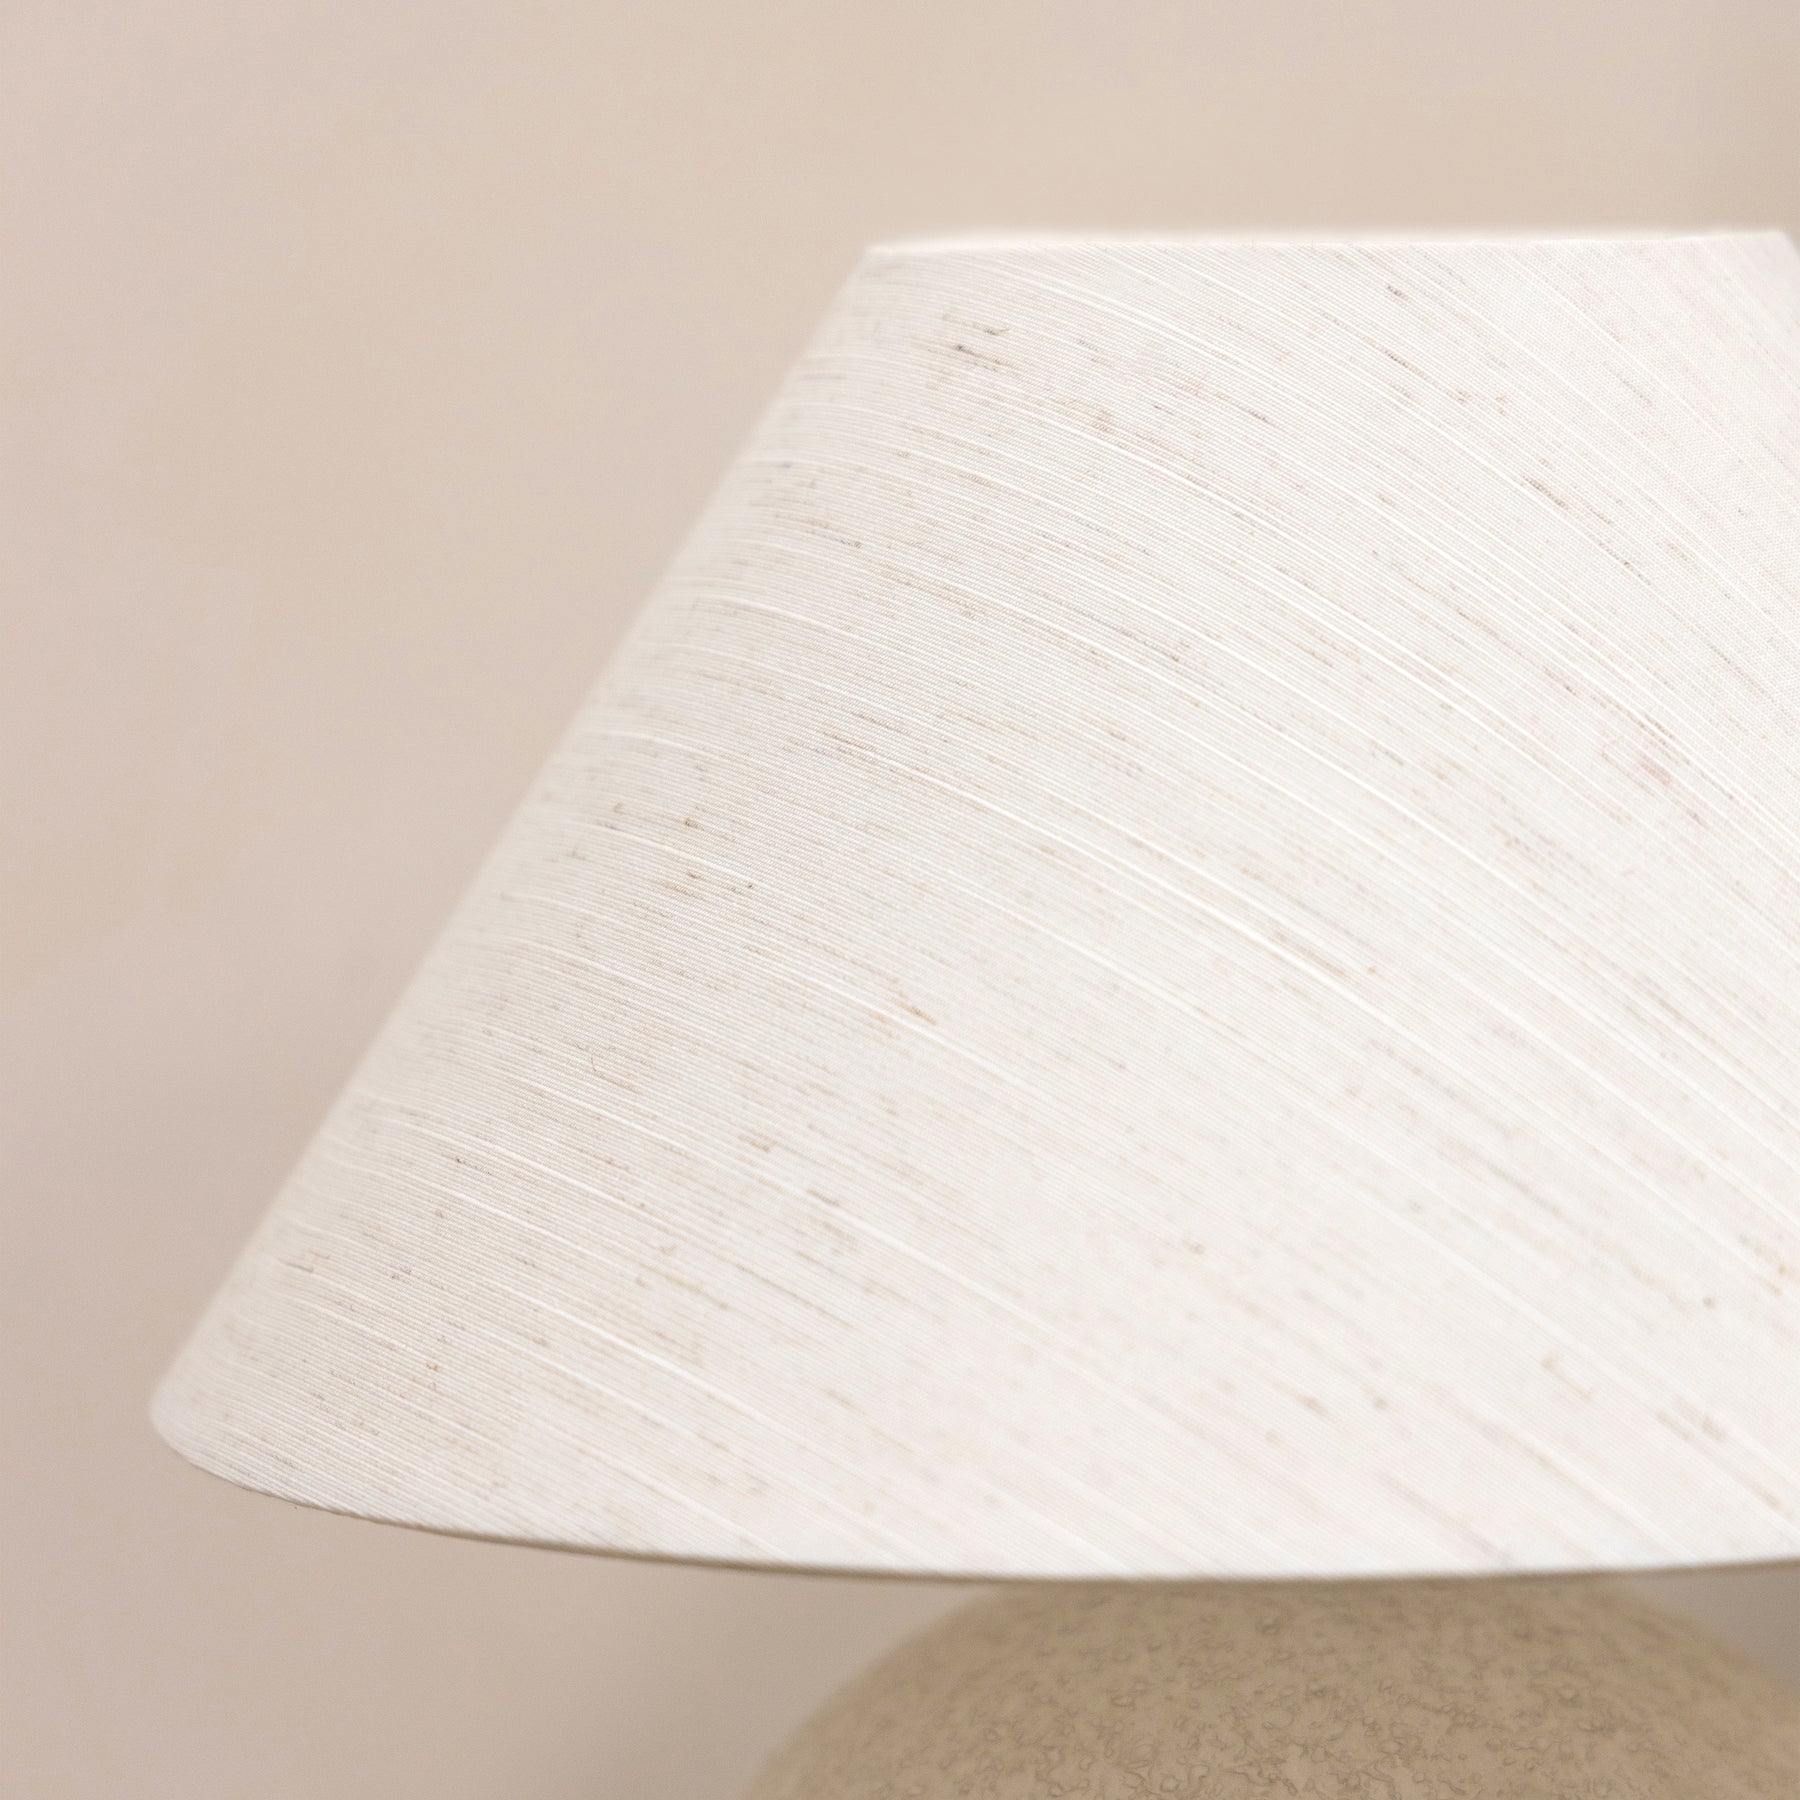 Corsica - Stone Ceramic Coolie Shade Table Lamp